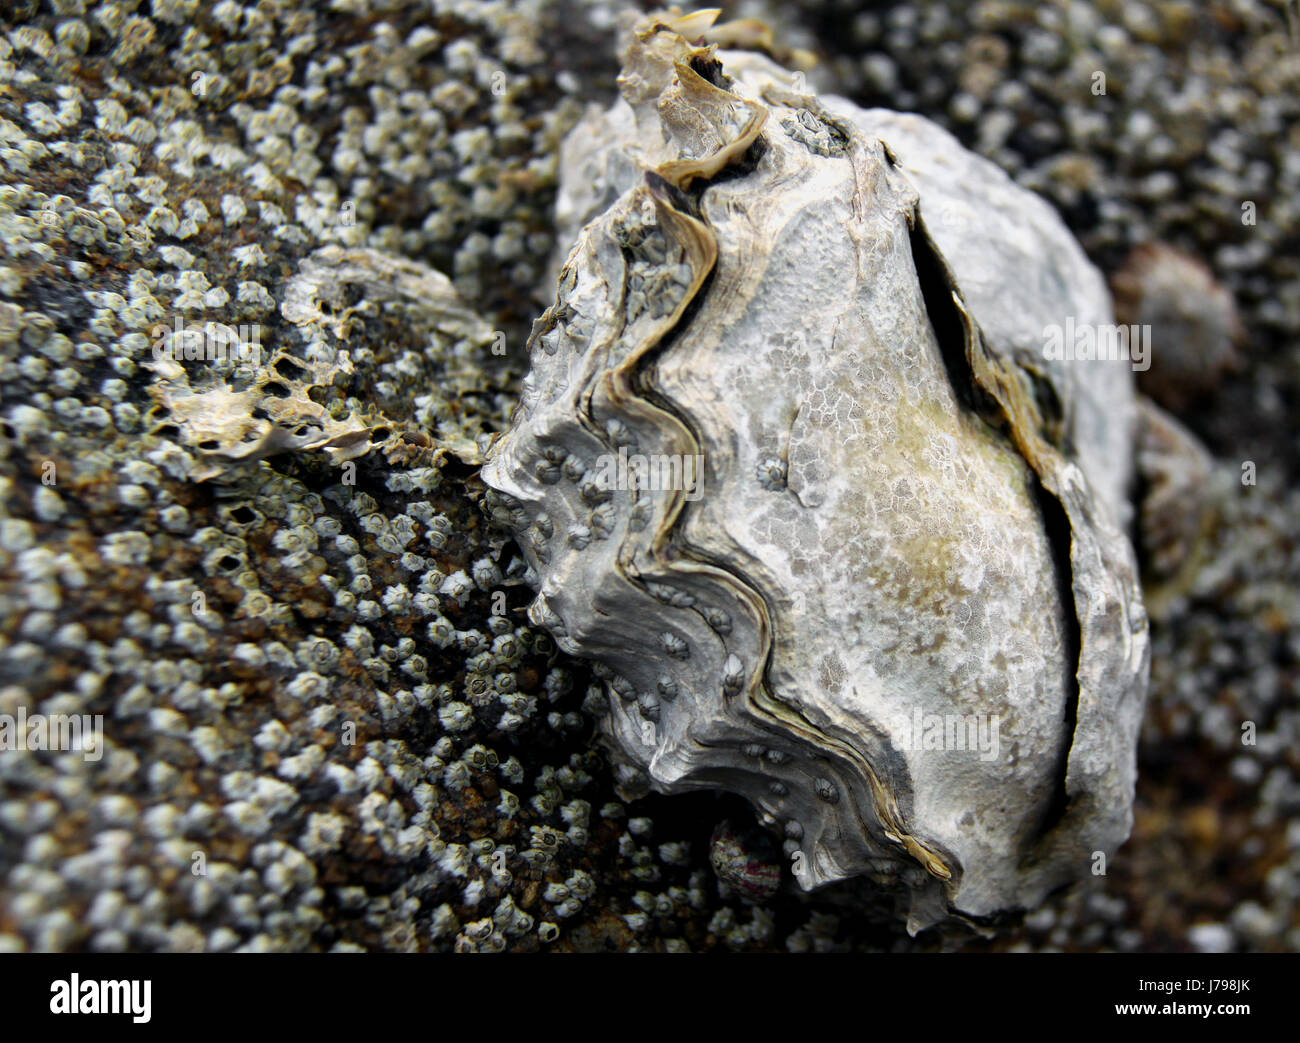 oyster on rock with barnacles Stock Photo